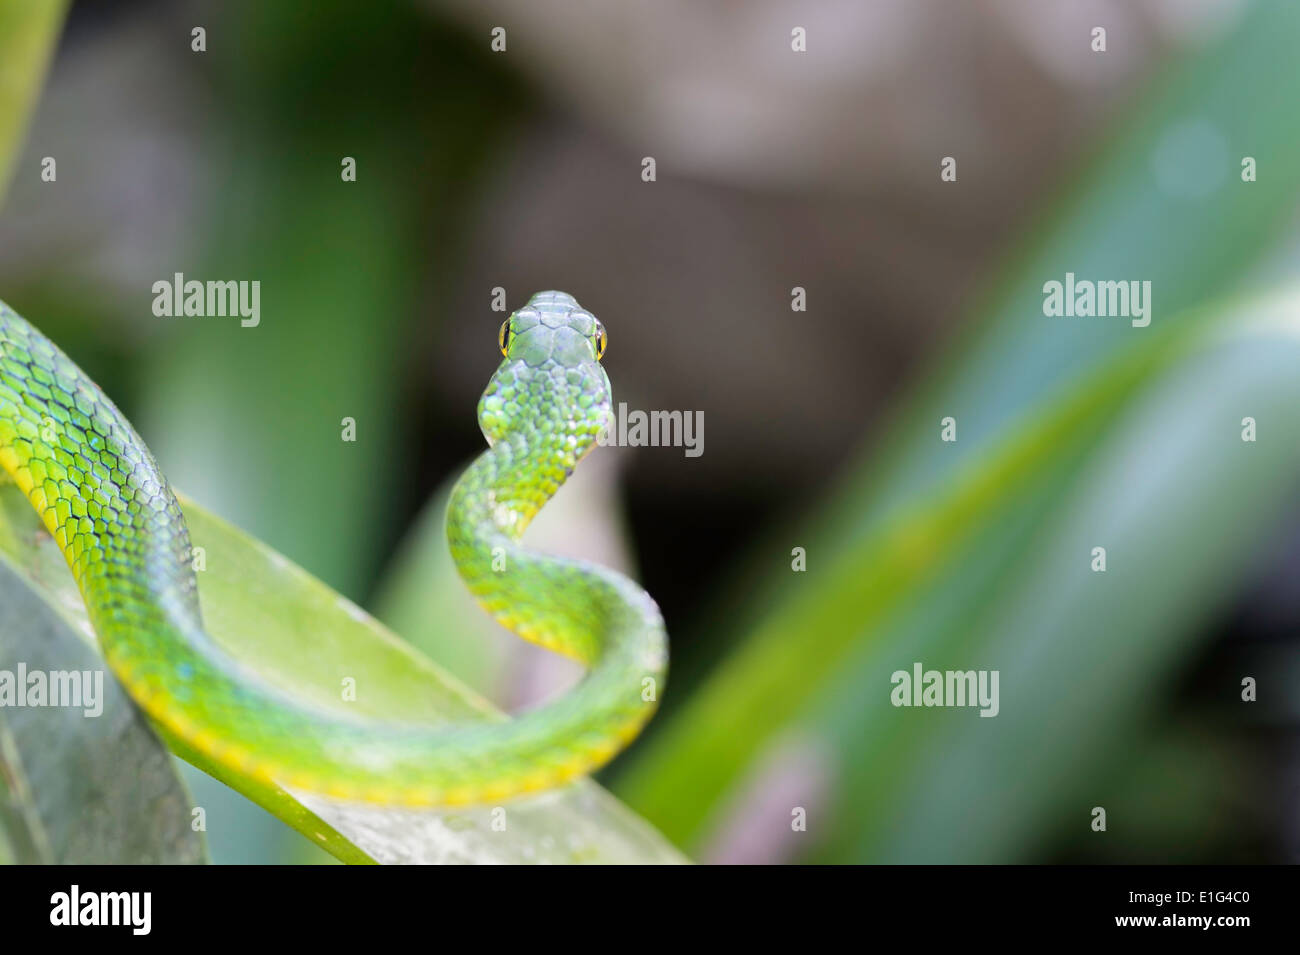 A green-headed tree snake in the rain forest of Costa Rica. Stock Photo